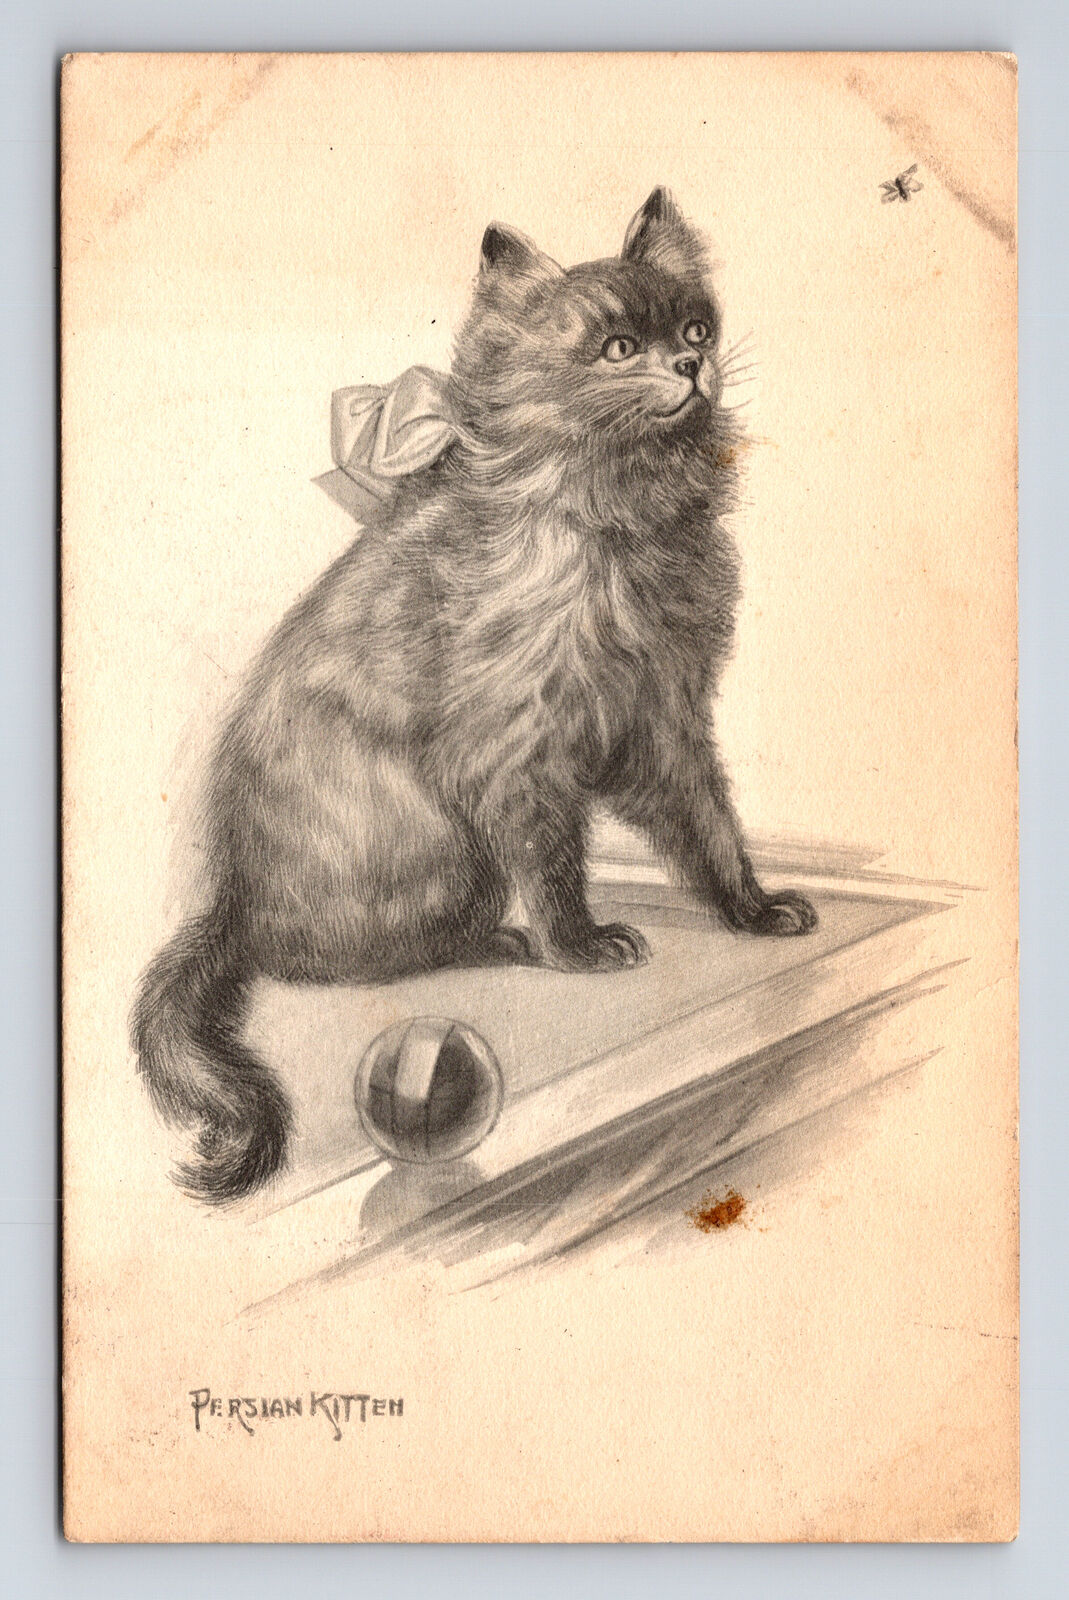 1911 Artist Pencil Sketch of Persian Kitten Cat Eying a Fly Postcard